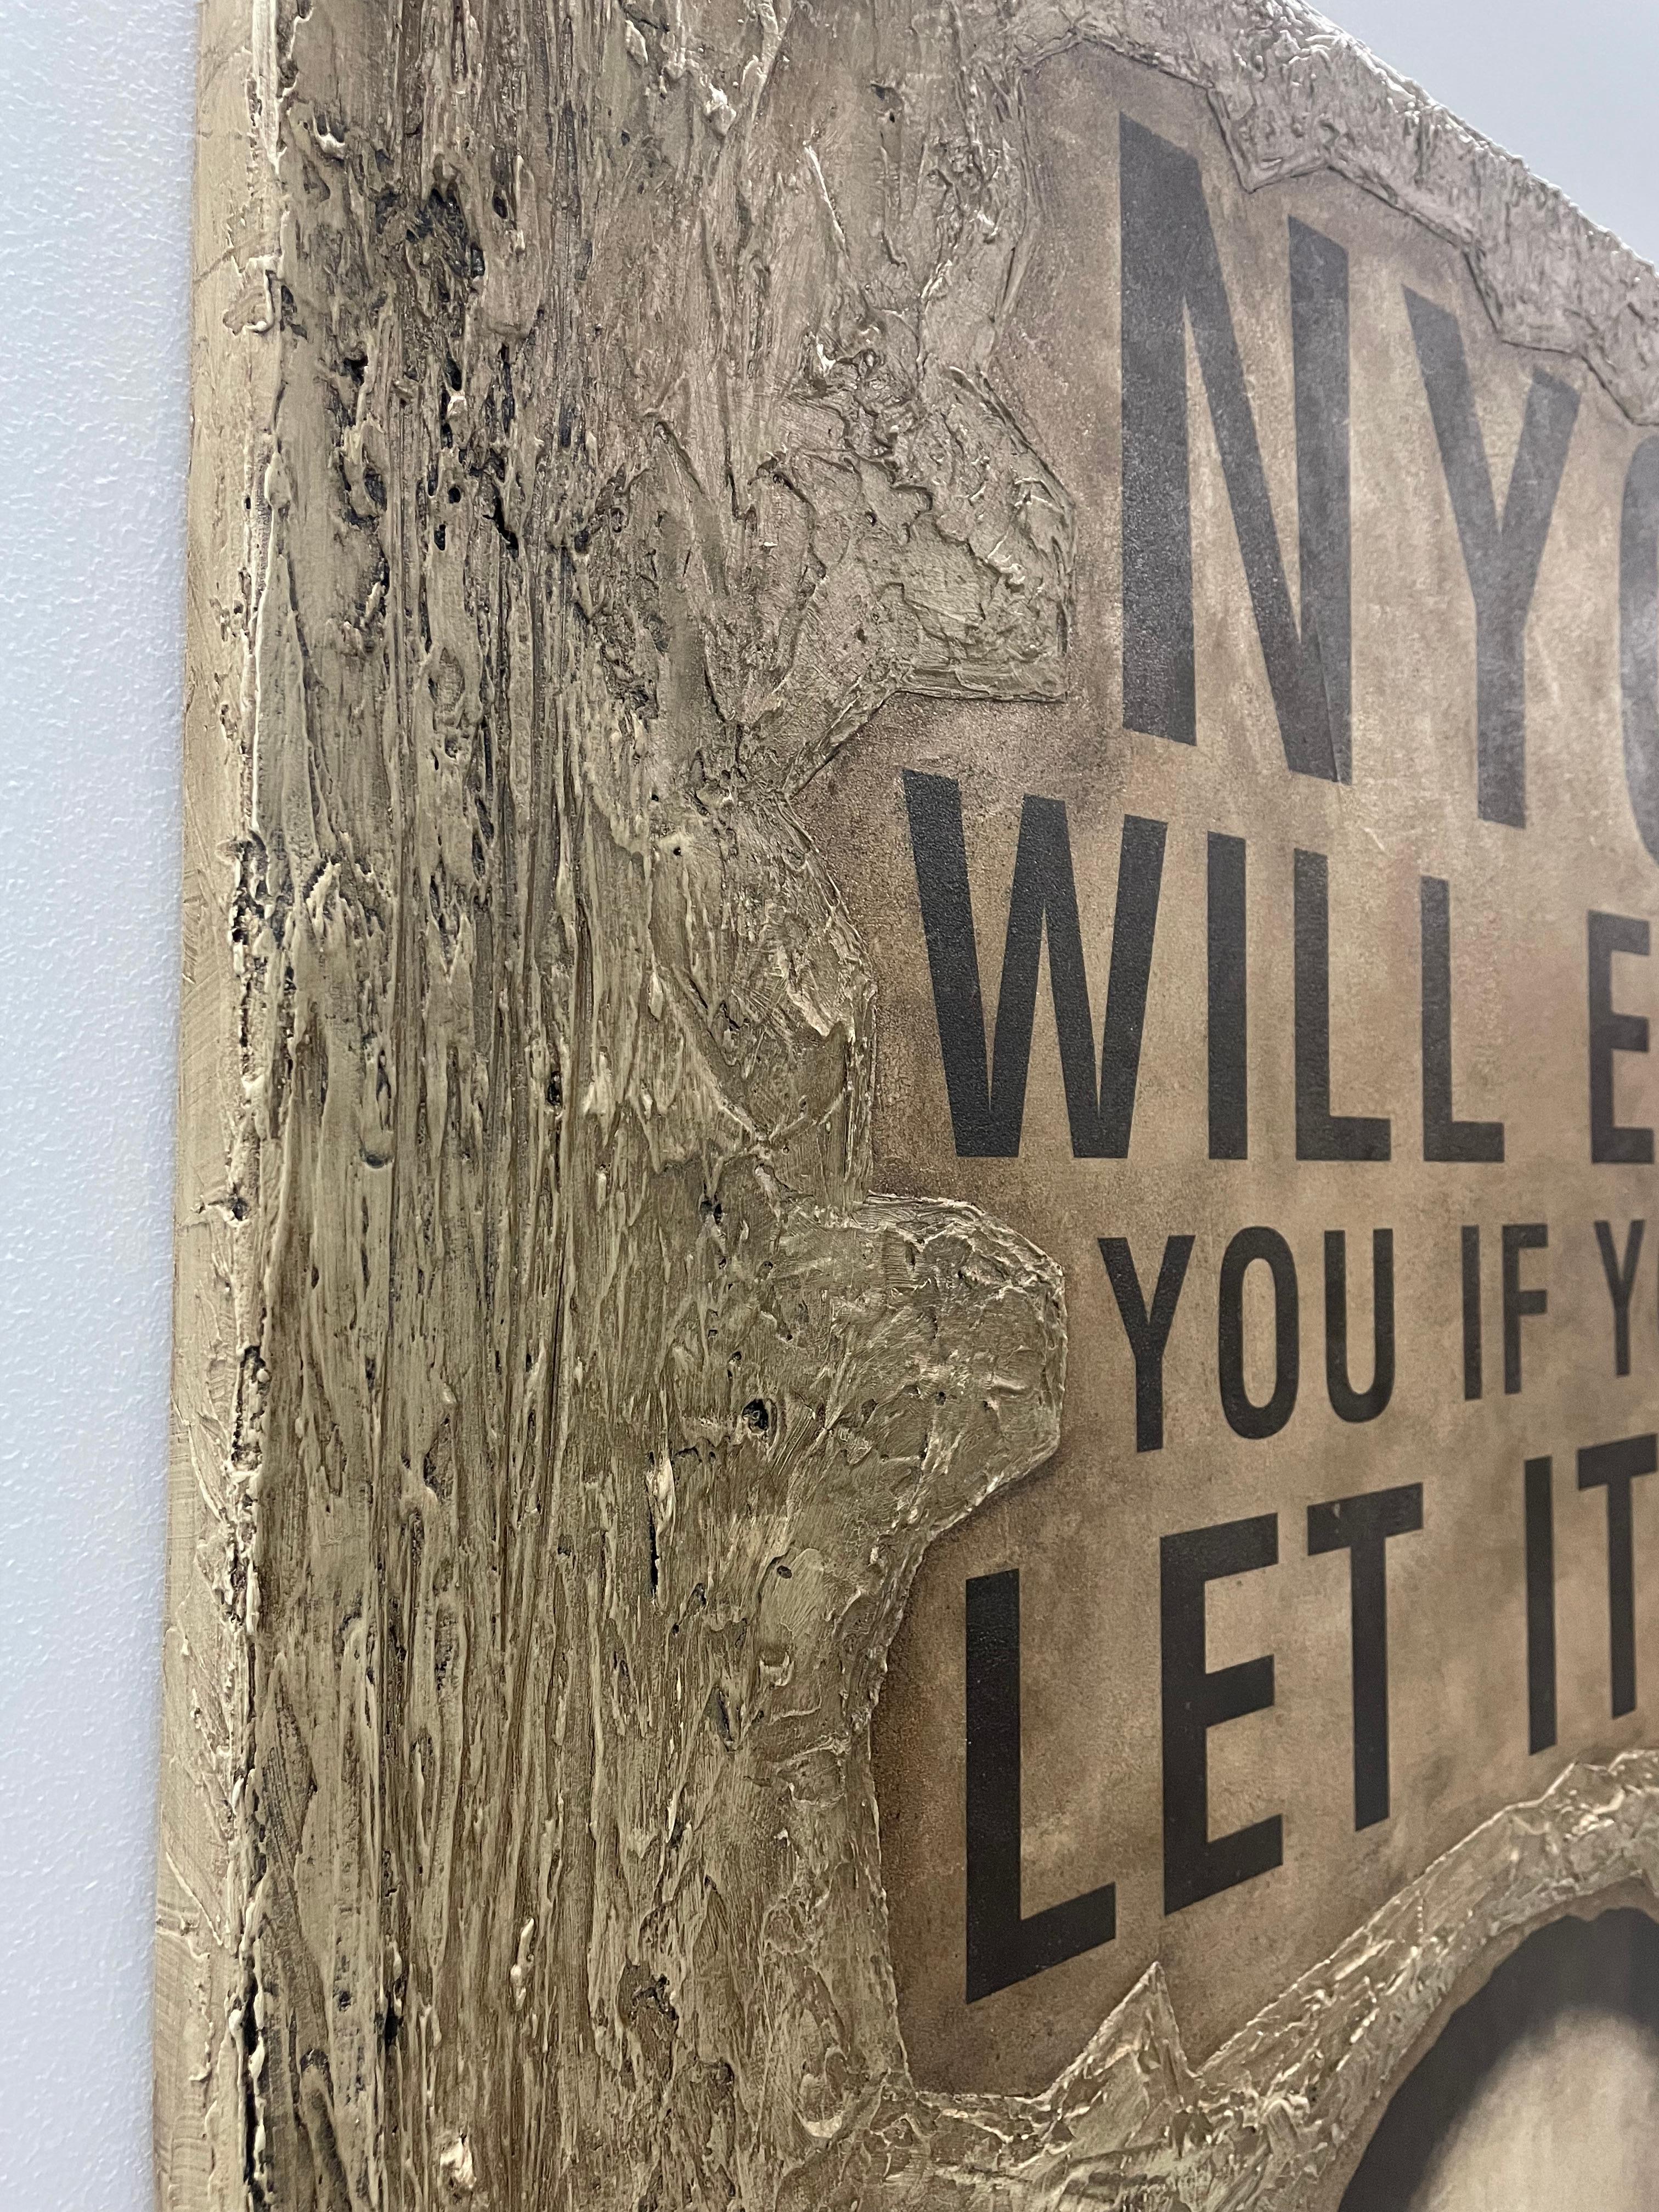 Artist: Ivan Orama
Title: NYC Will Eat Your If Your Let It!!!
Medium: Mixed Media
Size: 48 x 36 inches

Originally created on paper and wheat pasted on the walls of NYC's 21st Precinct as part of a major NYC multi-artist art installation in 2014,